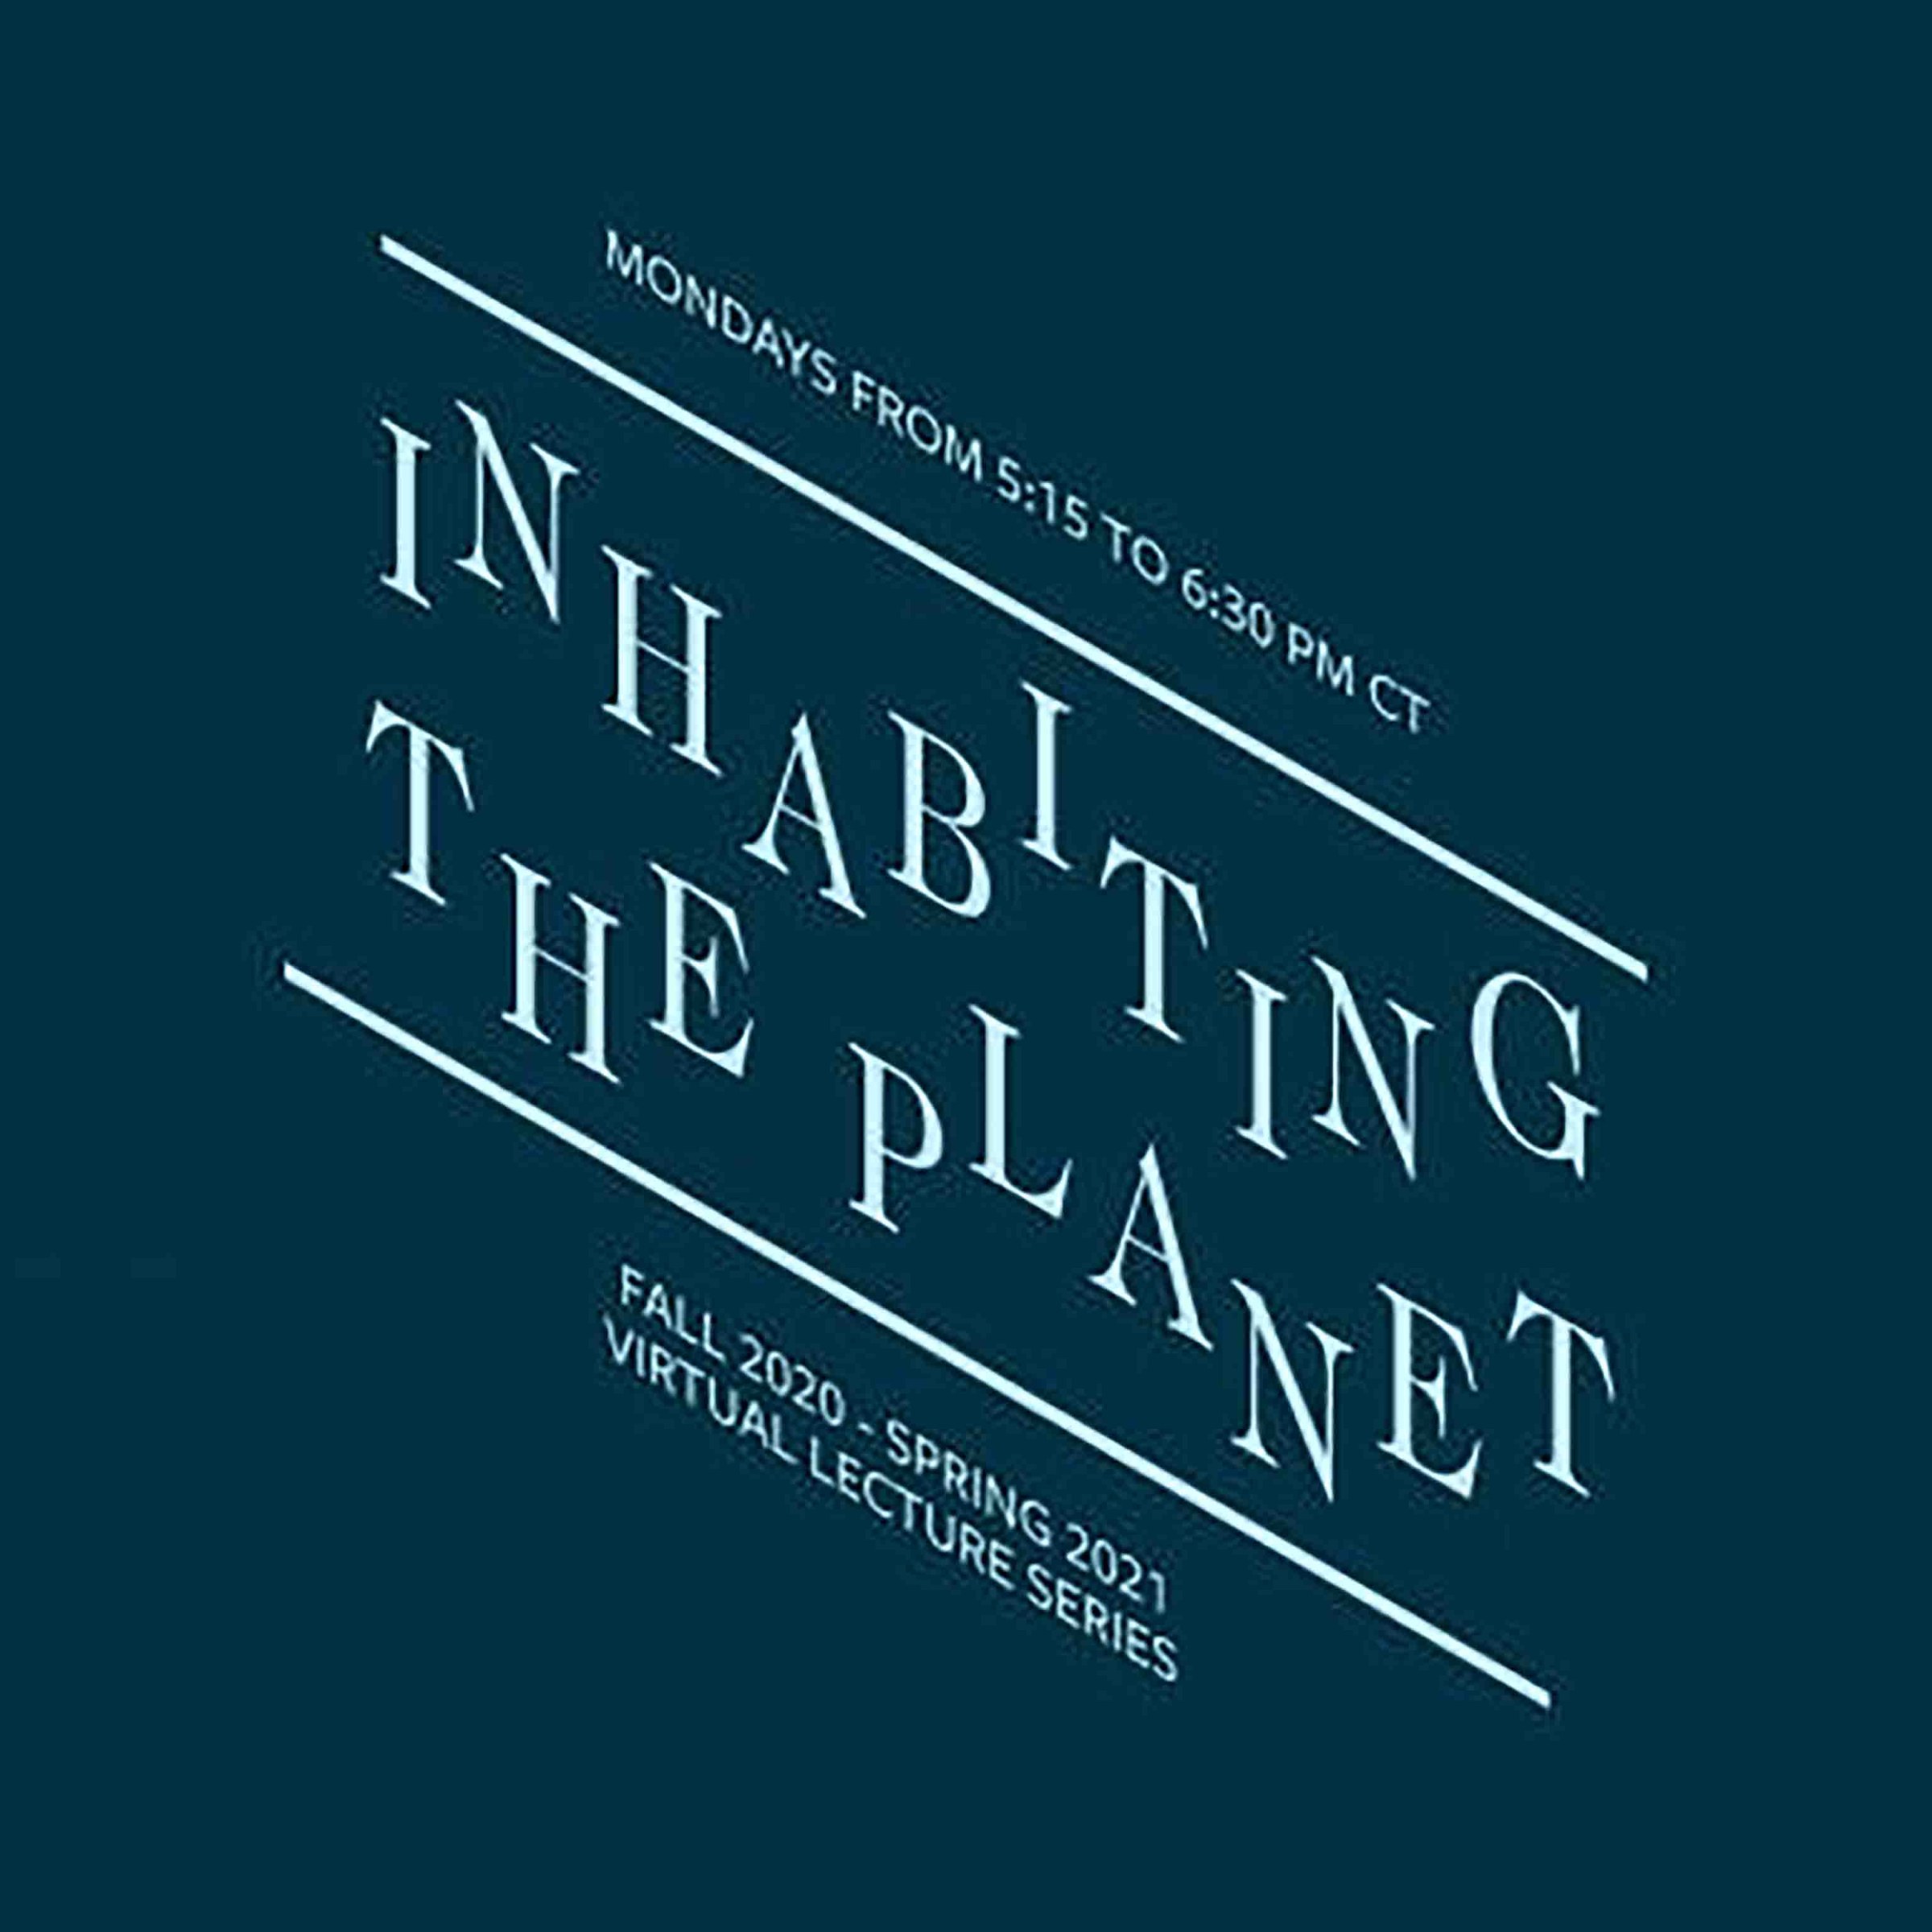 Graphic introducing lecture series entitled inhabiting the planet